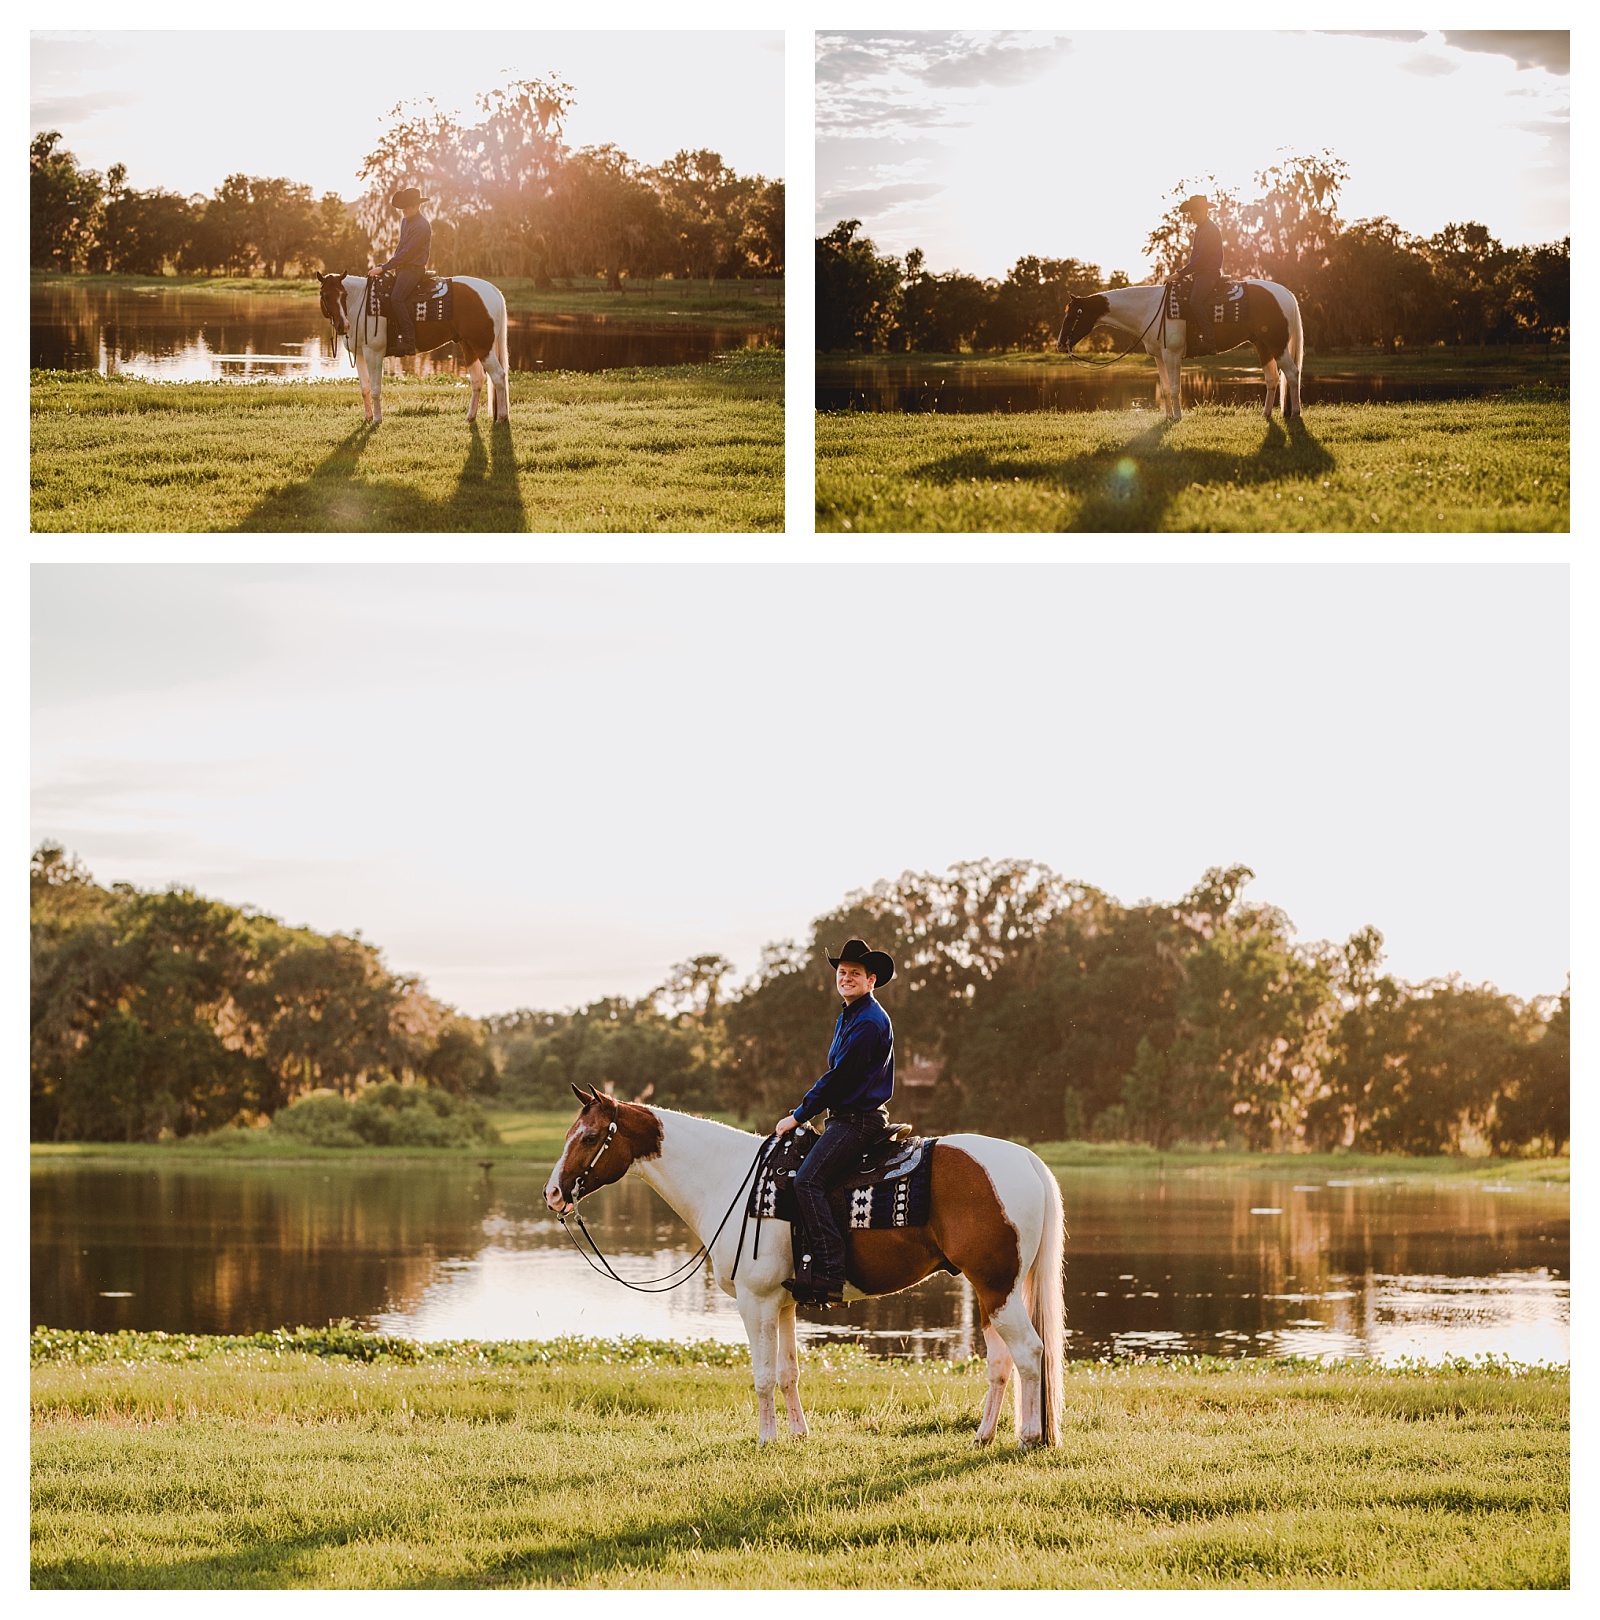 Western pleasure pinto horse by a lake in Florida.